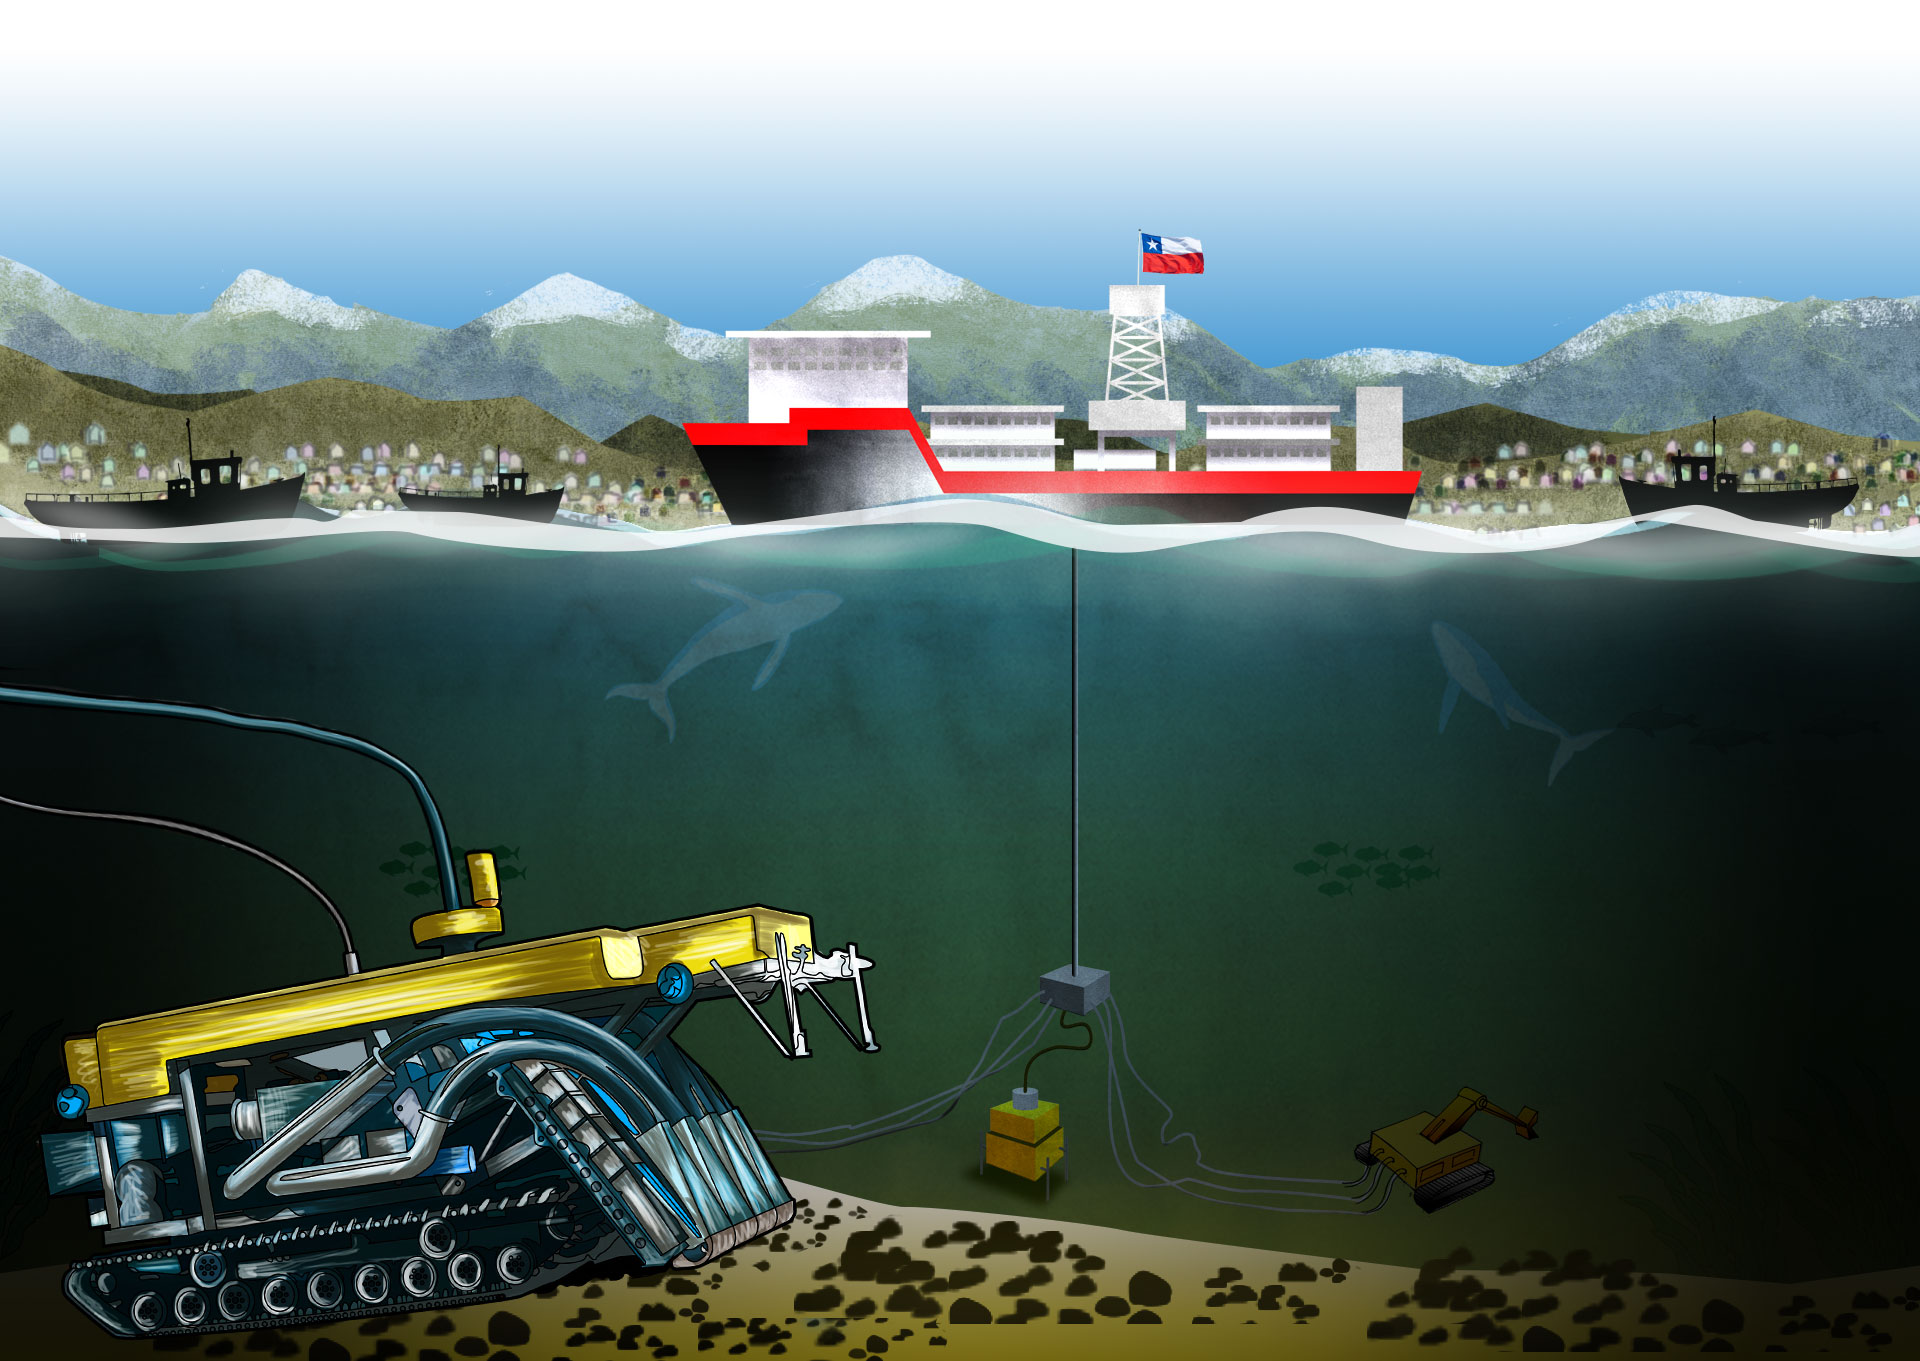 By land or by sea: will Chile open the door to deep sea mining?